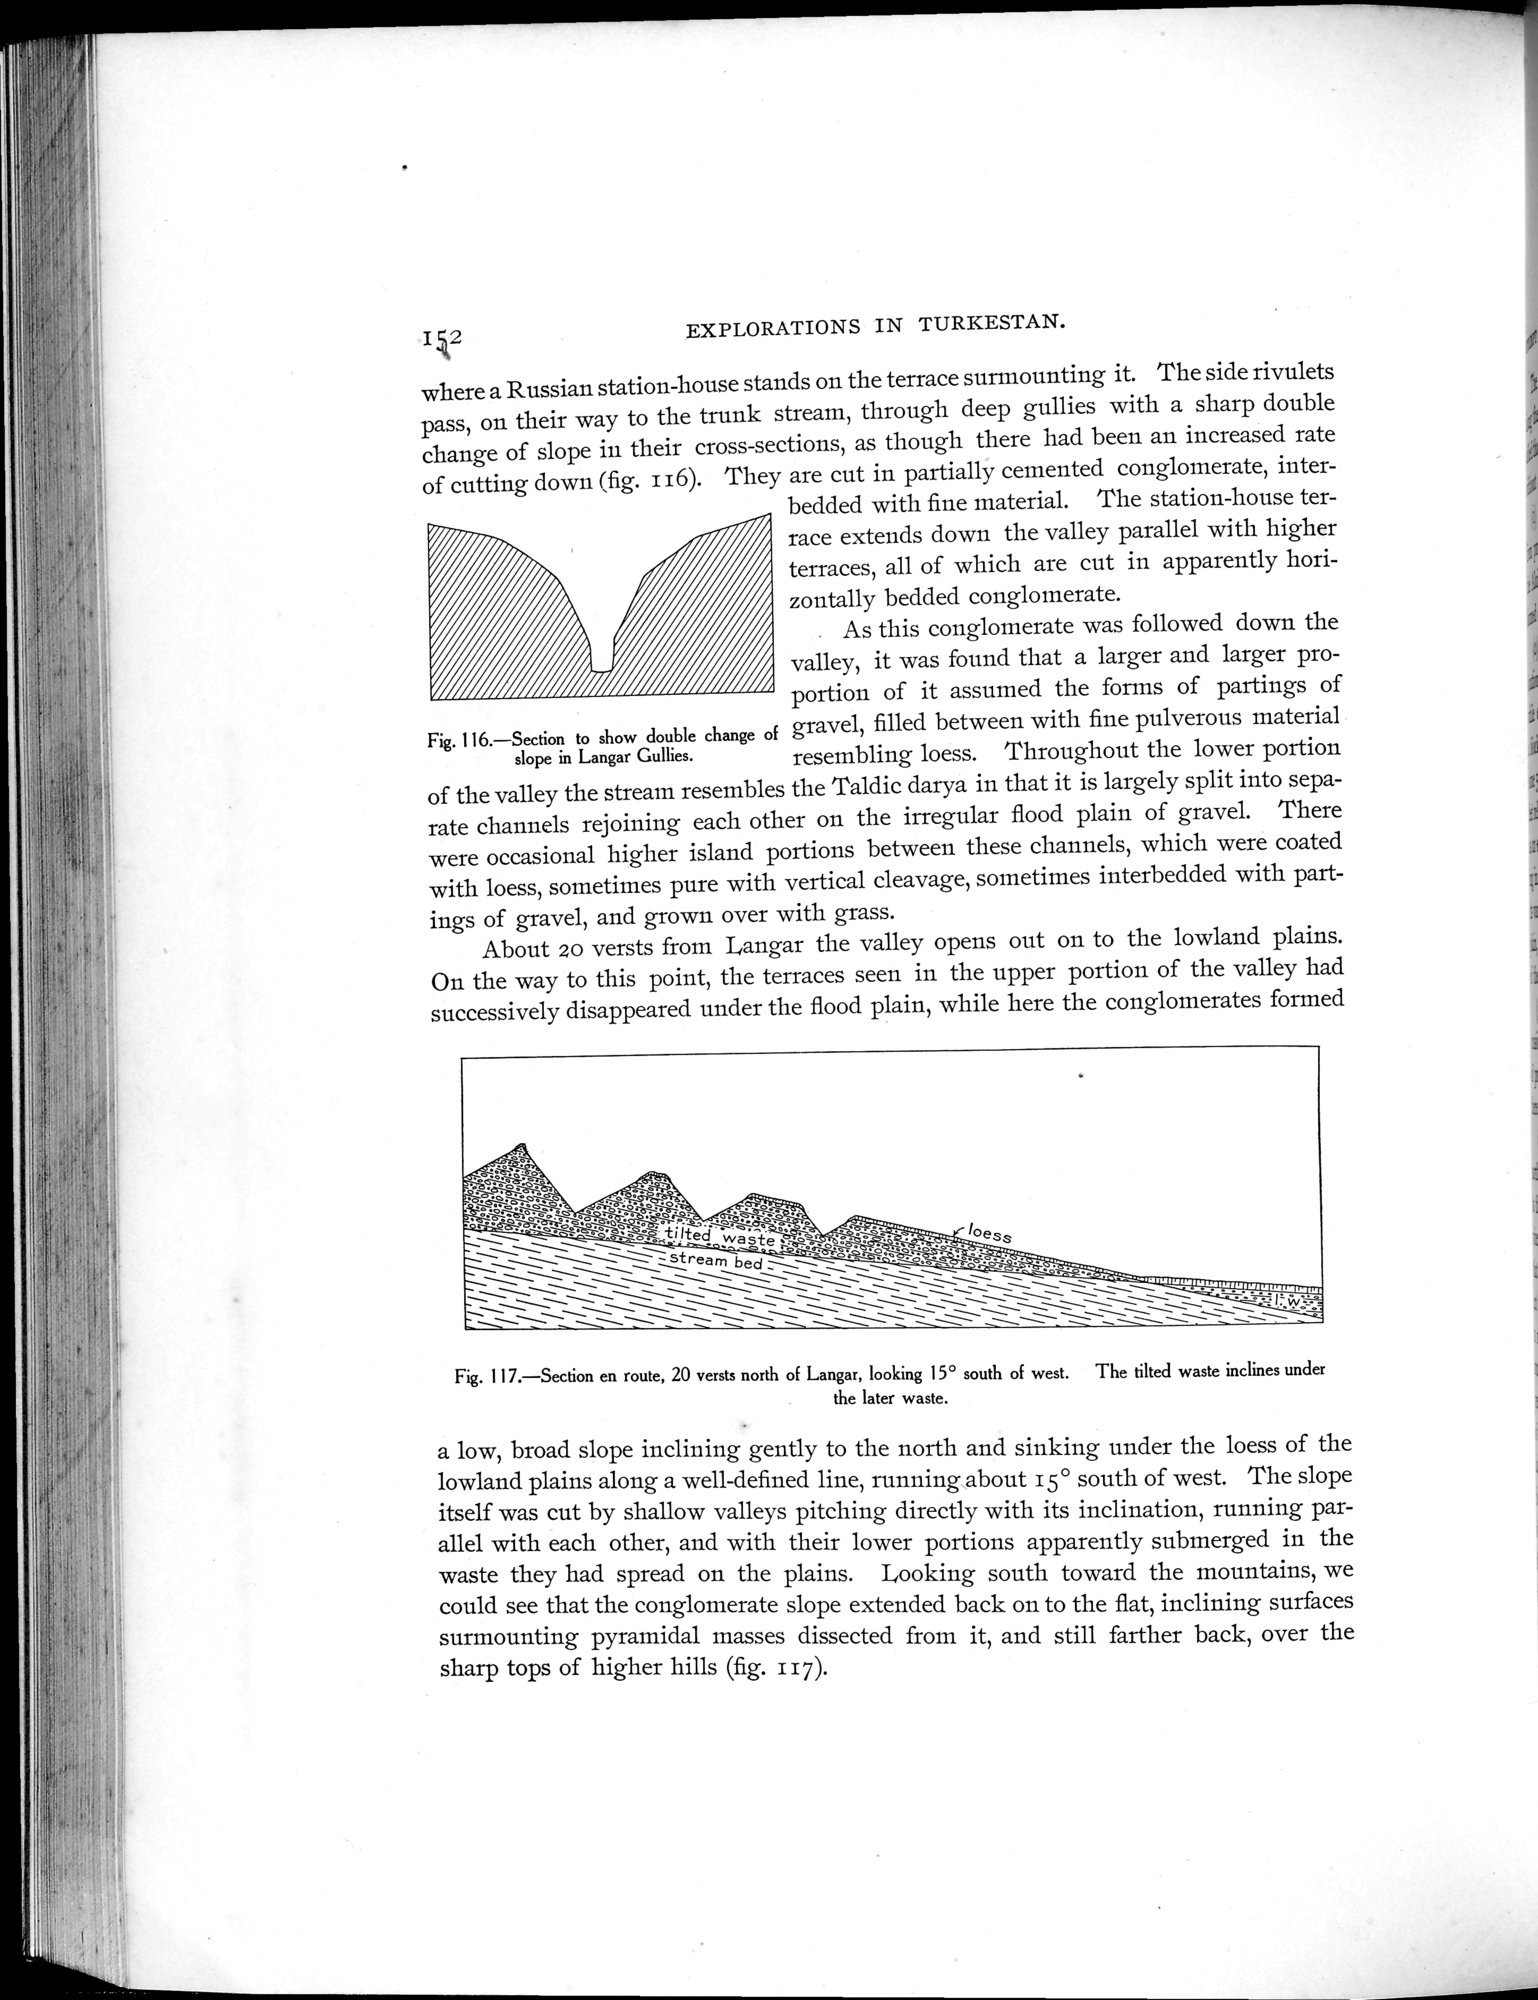 Explorations in Turkestan 1903 : vol.1 / Page 180 (Grayscale High Resolution Image)